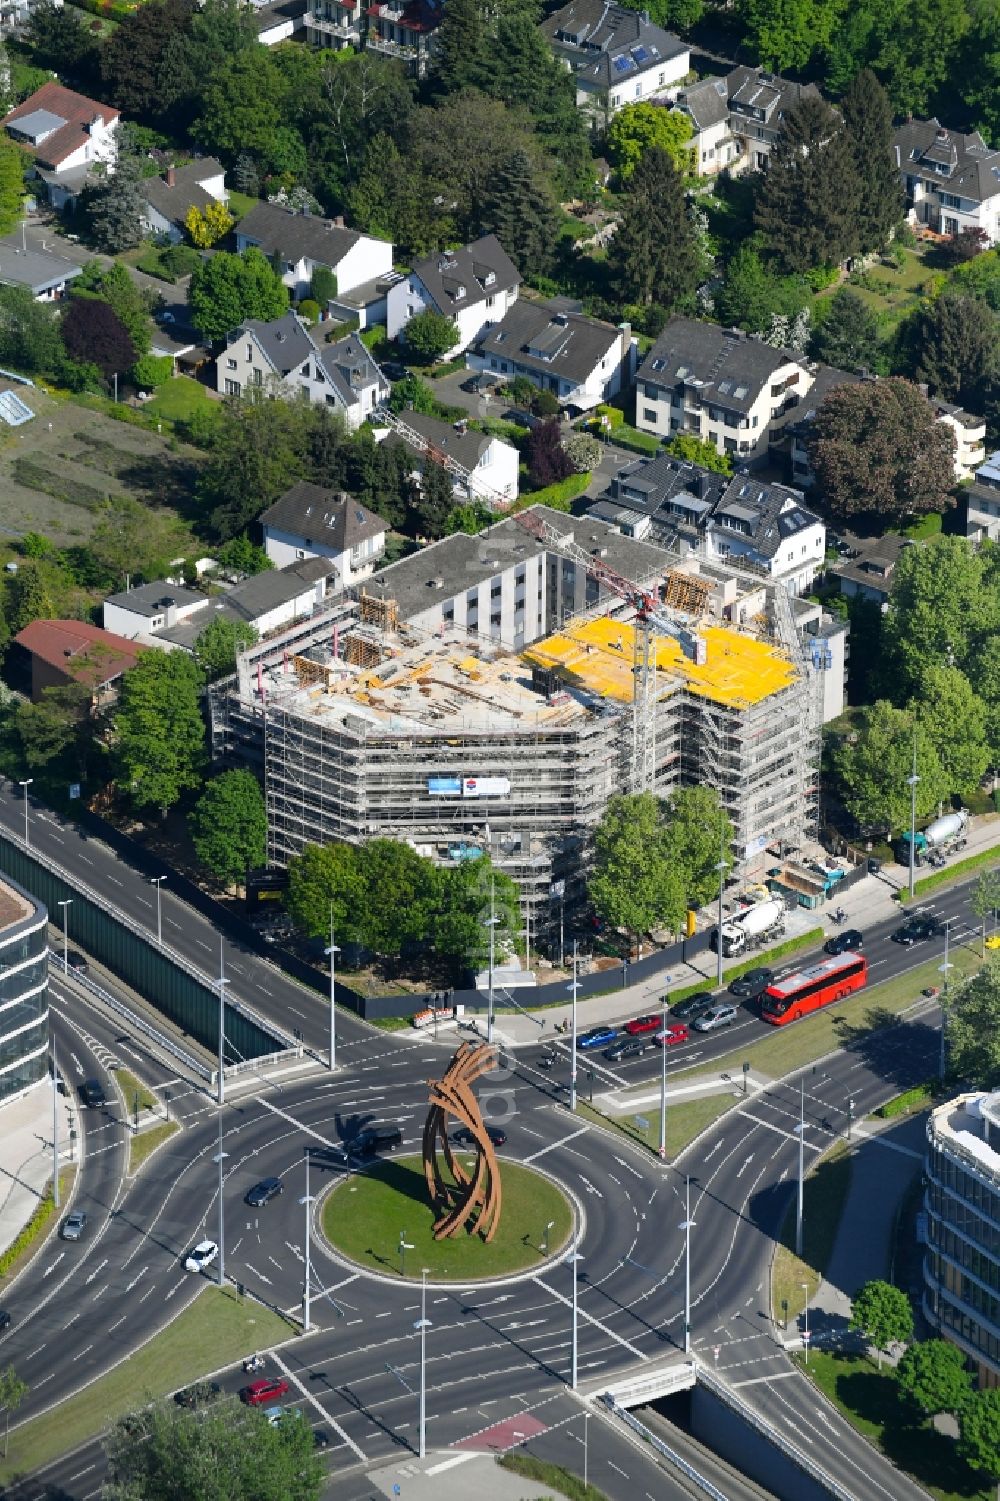 Aerial image Bonn - Construction site for renovation work on the office building of the business building of the former state central bank in Bonn in the federal state of North Rhine-Westphalia, Germany